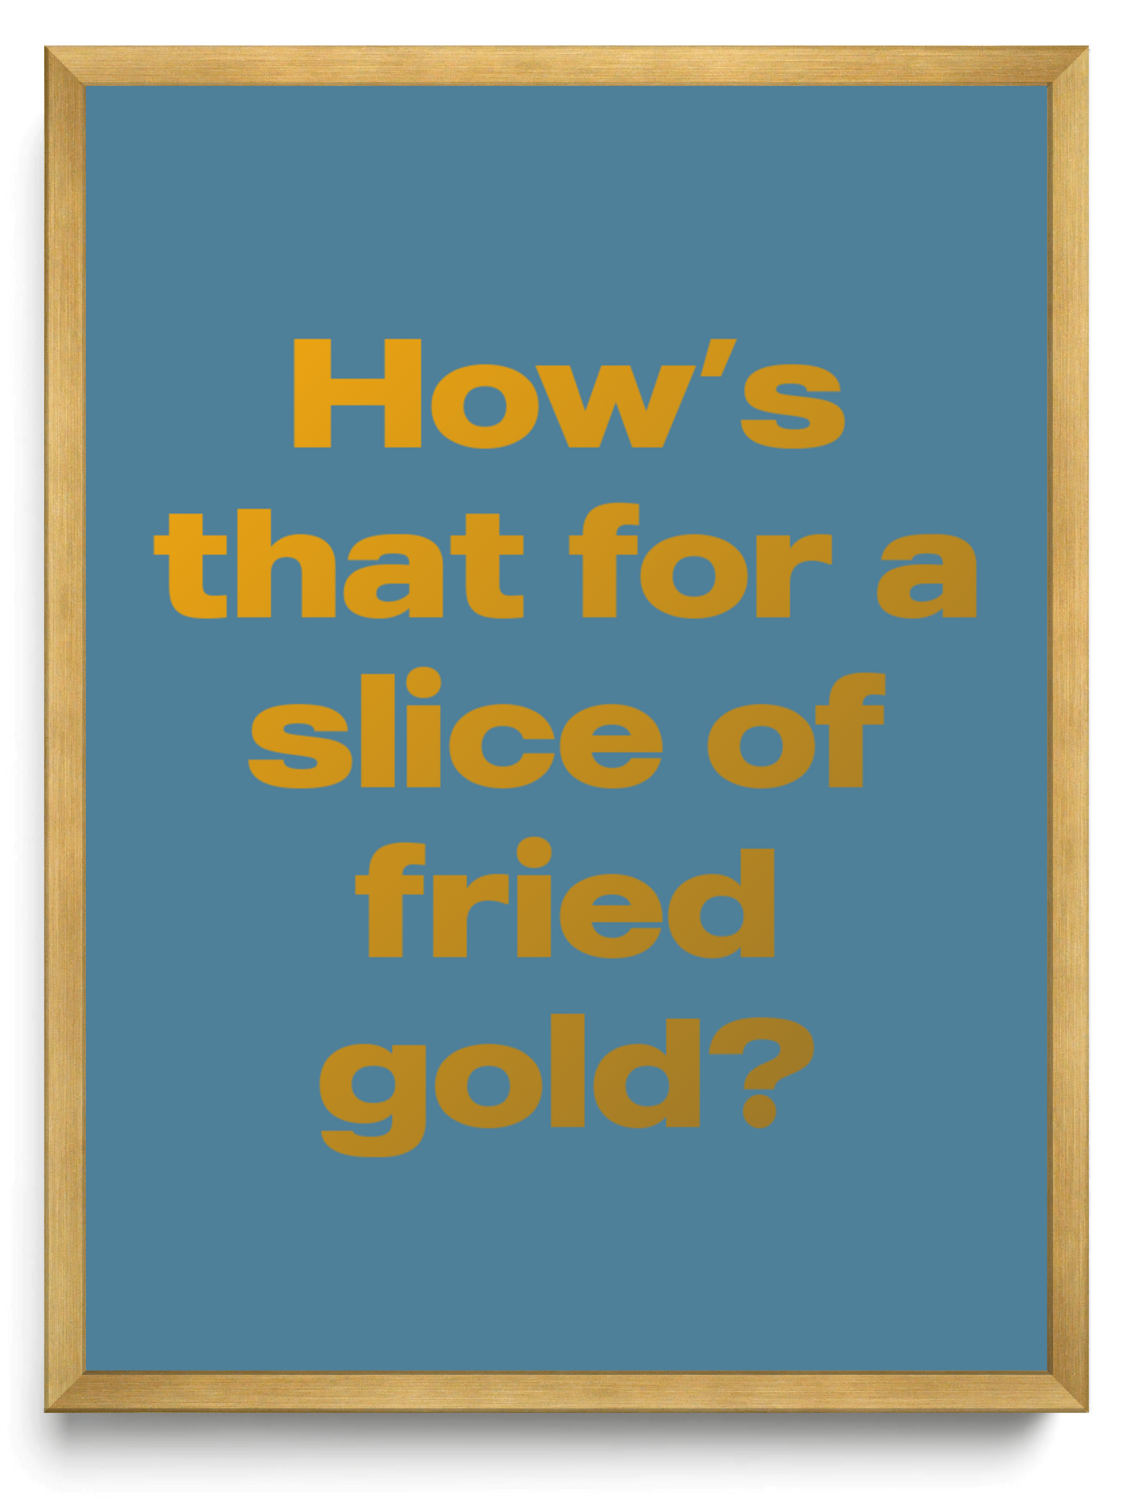 How’s that for a slice of fried gold?